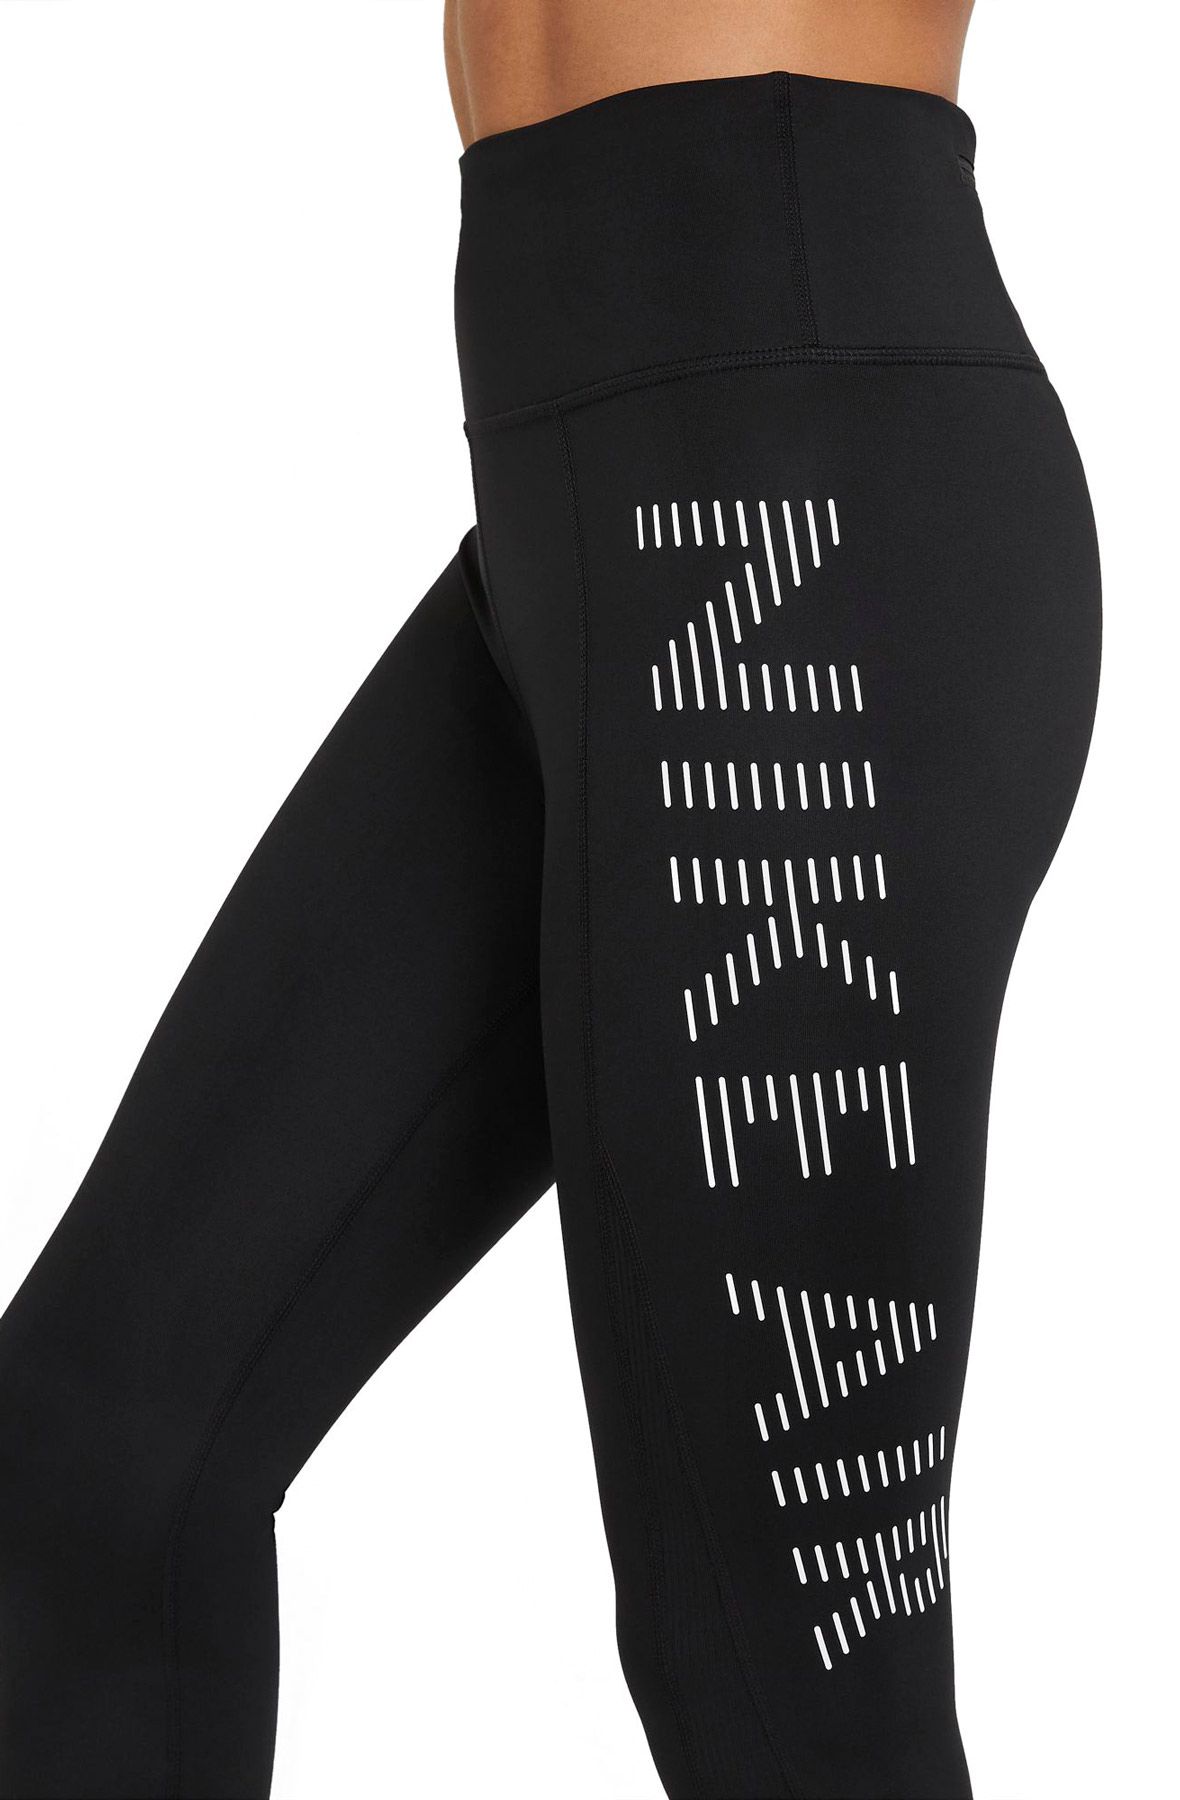 Womens high waisted compression 7/8 leggings Nike AIR EPIC FAST W